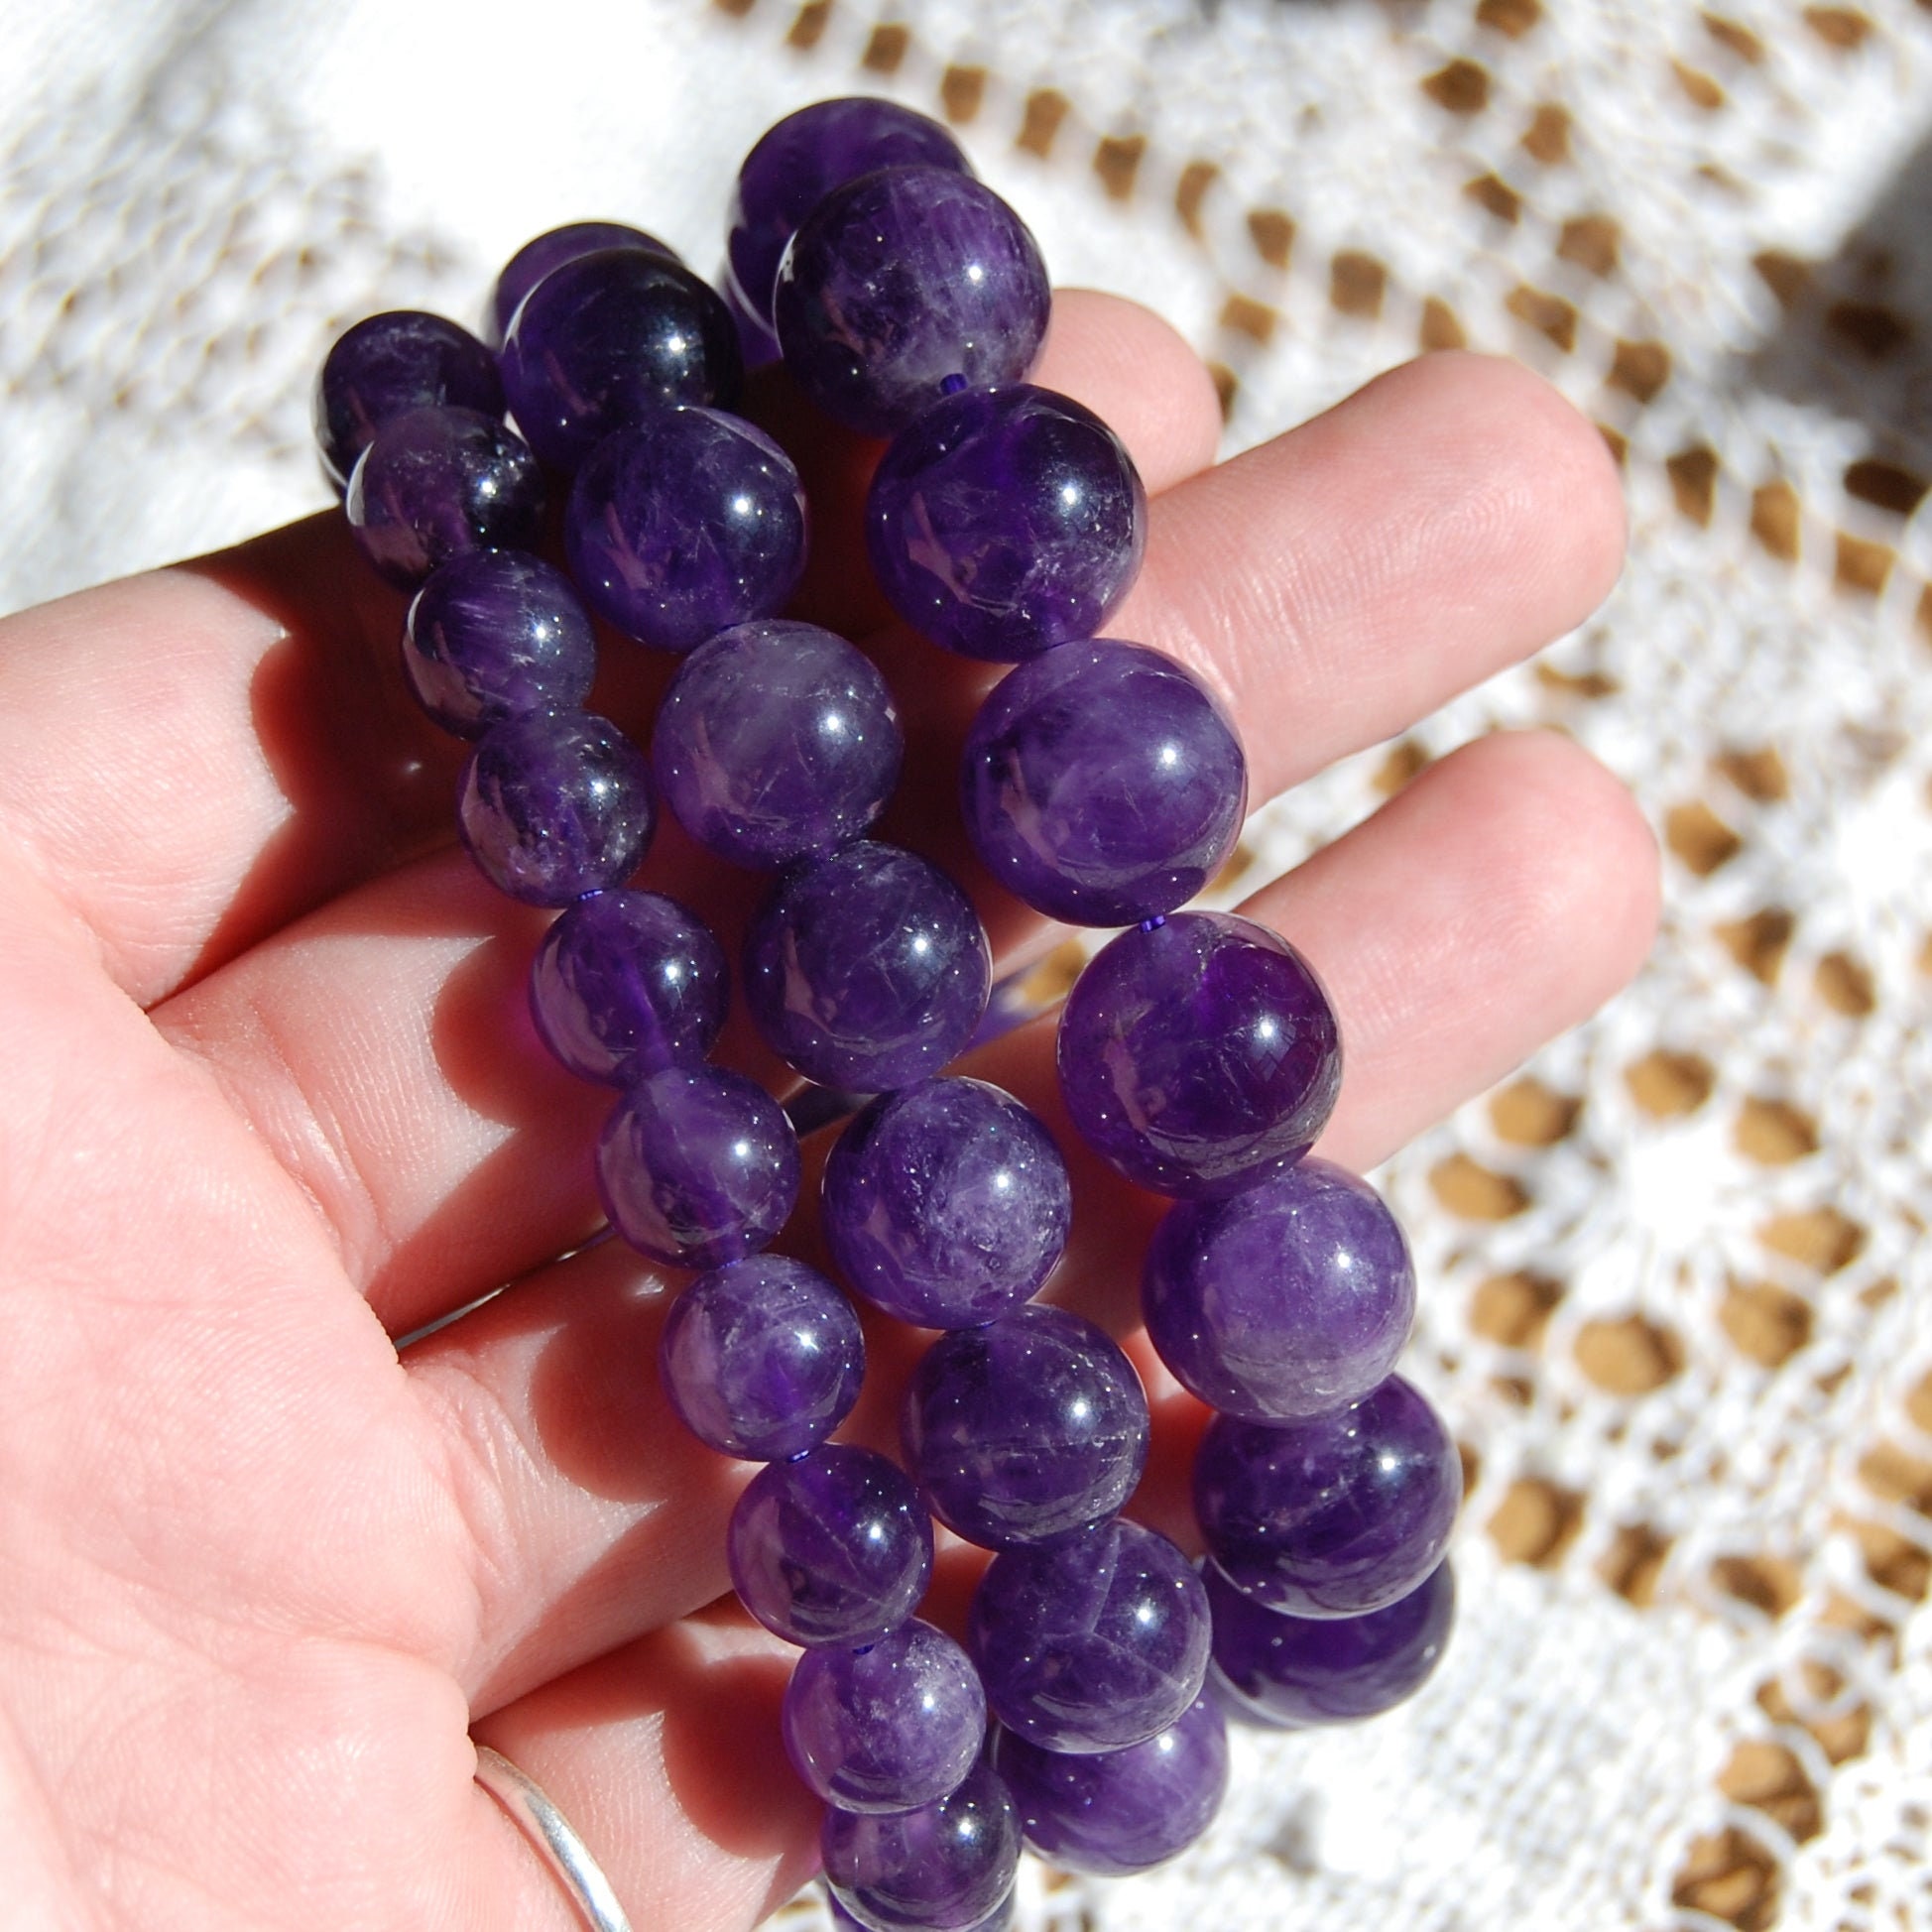 12mm Large Beads Amethyst Bracelet High Clarity Natural Healing